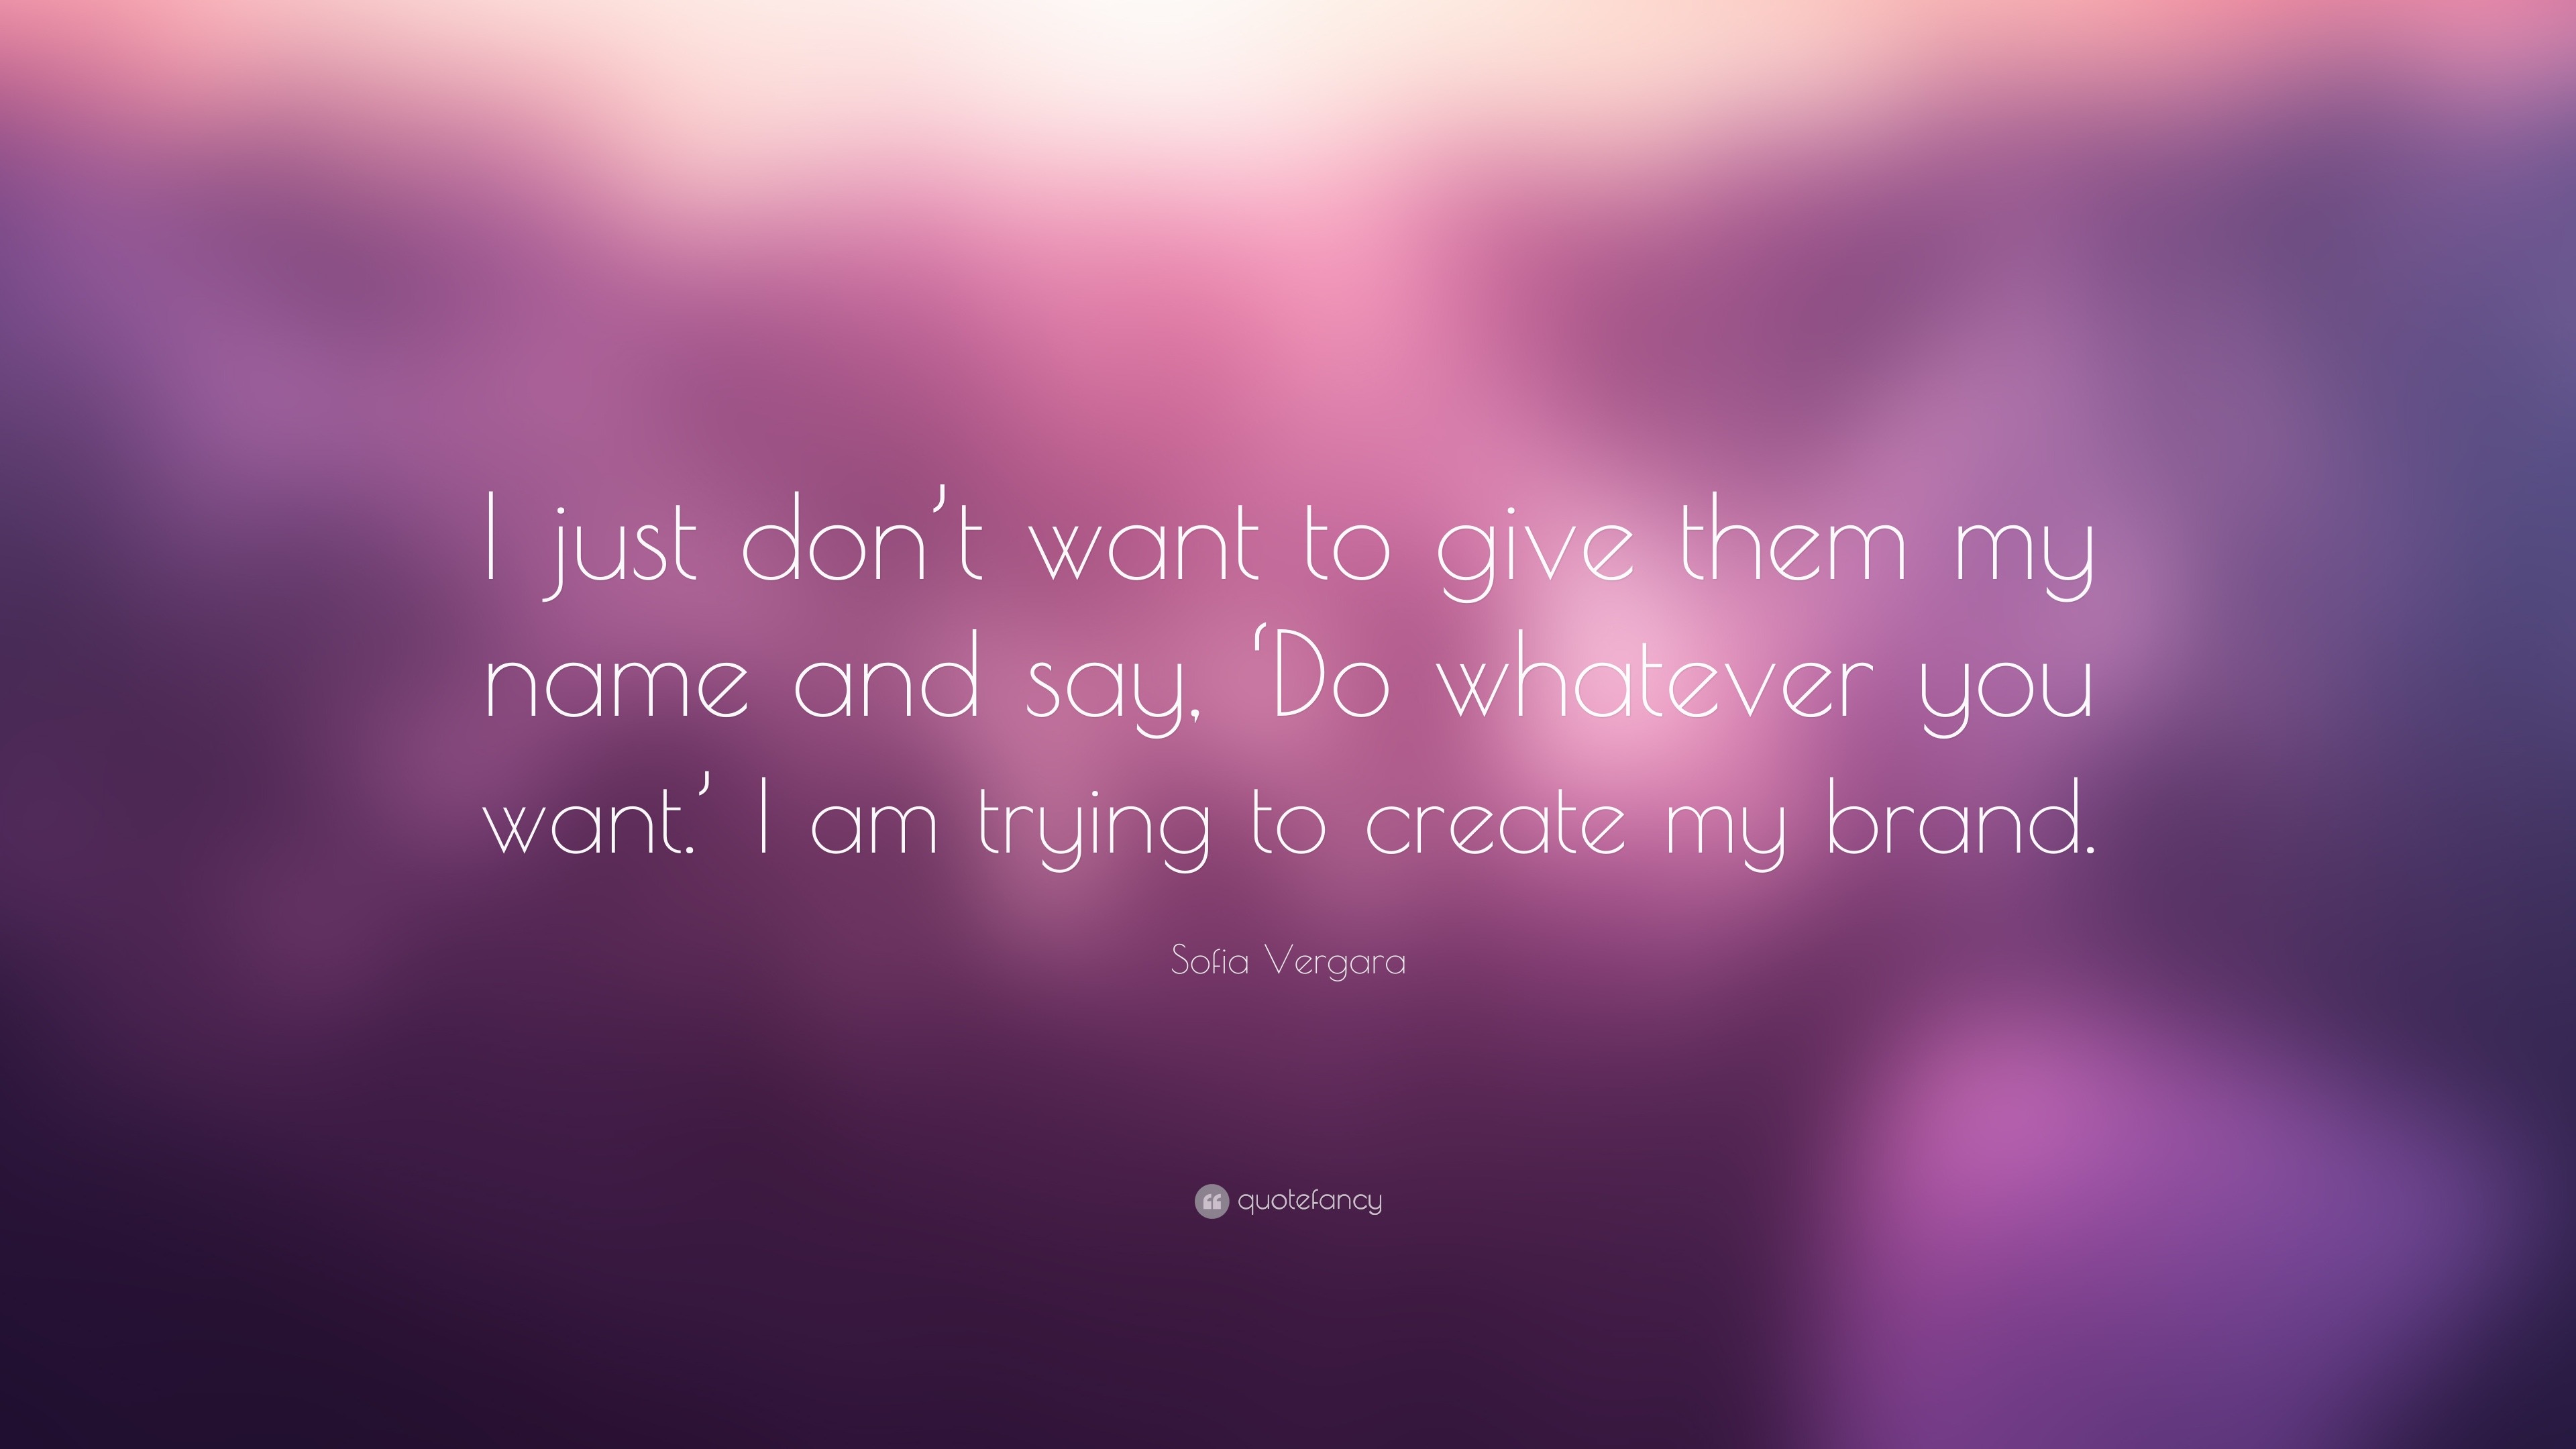 Sofia Vergara Quote: “I just don't want to give them my name and say, 'Do